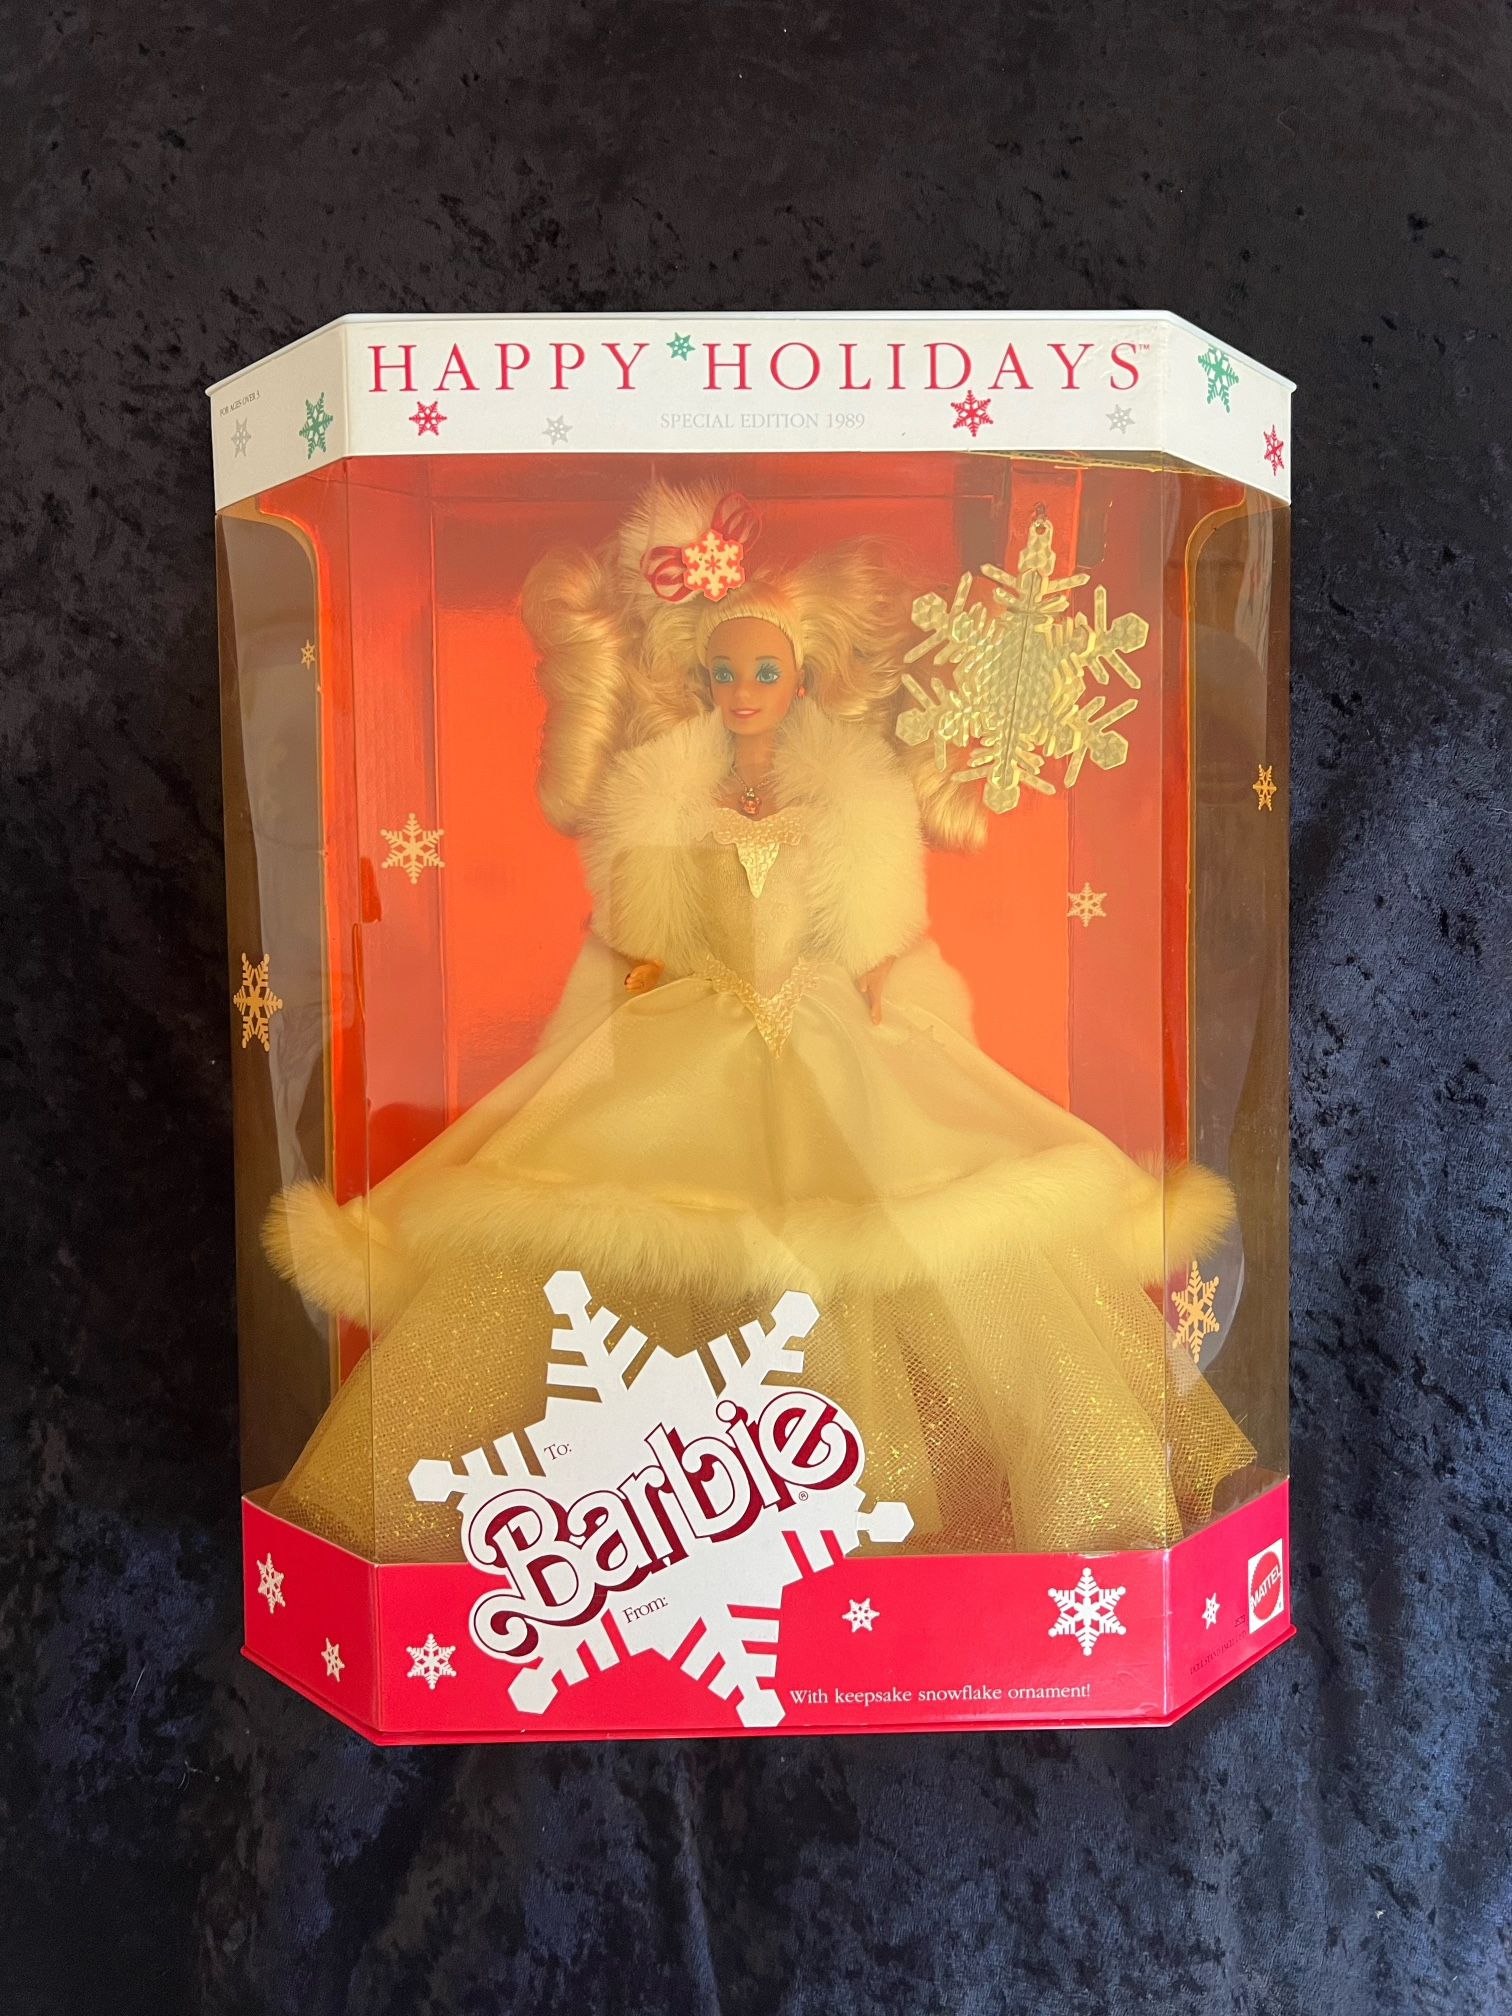 Mattel Barbie Happy Holidays 1989 Special Edition Snowflake Ornament